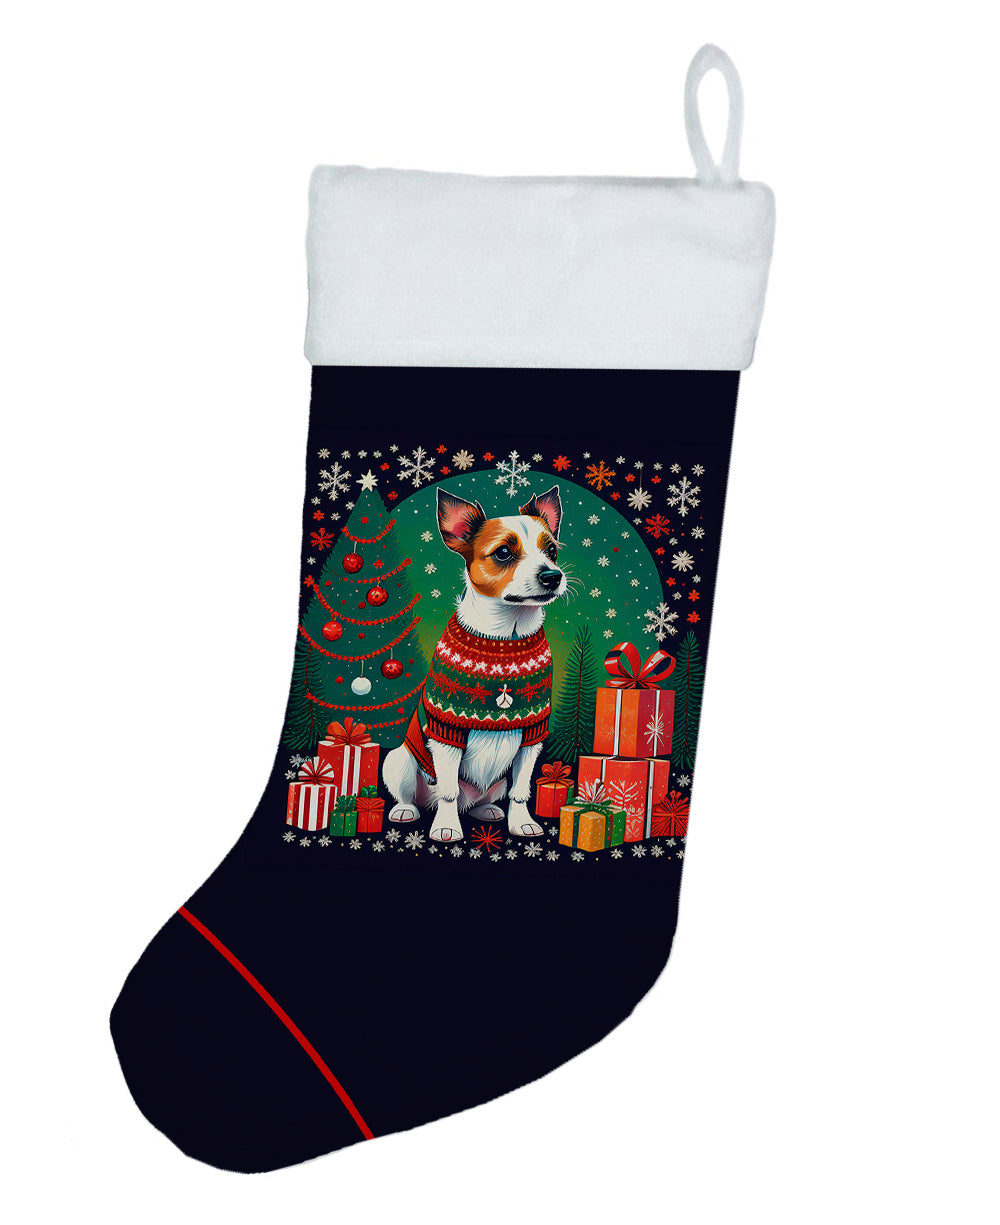 Buy this Jack Russell Terrier Christmas Christmas Stocking